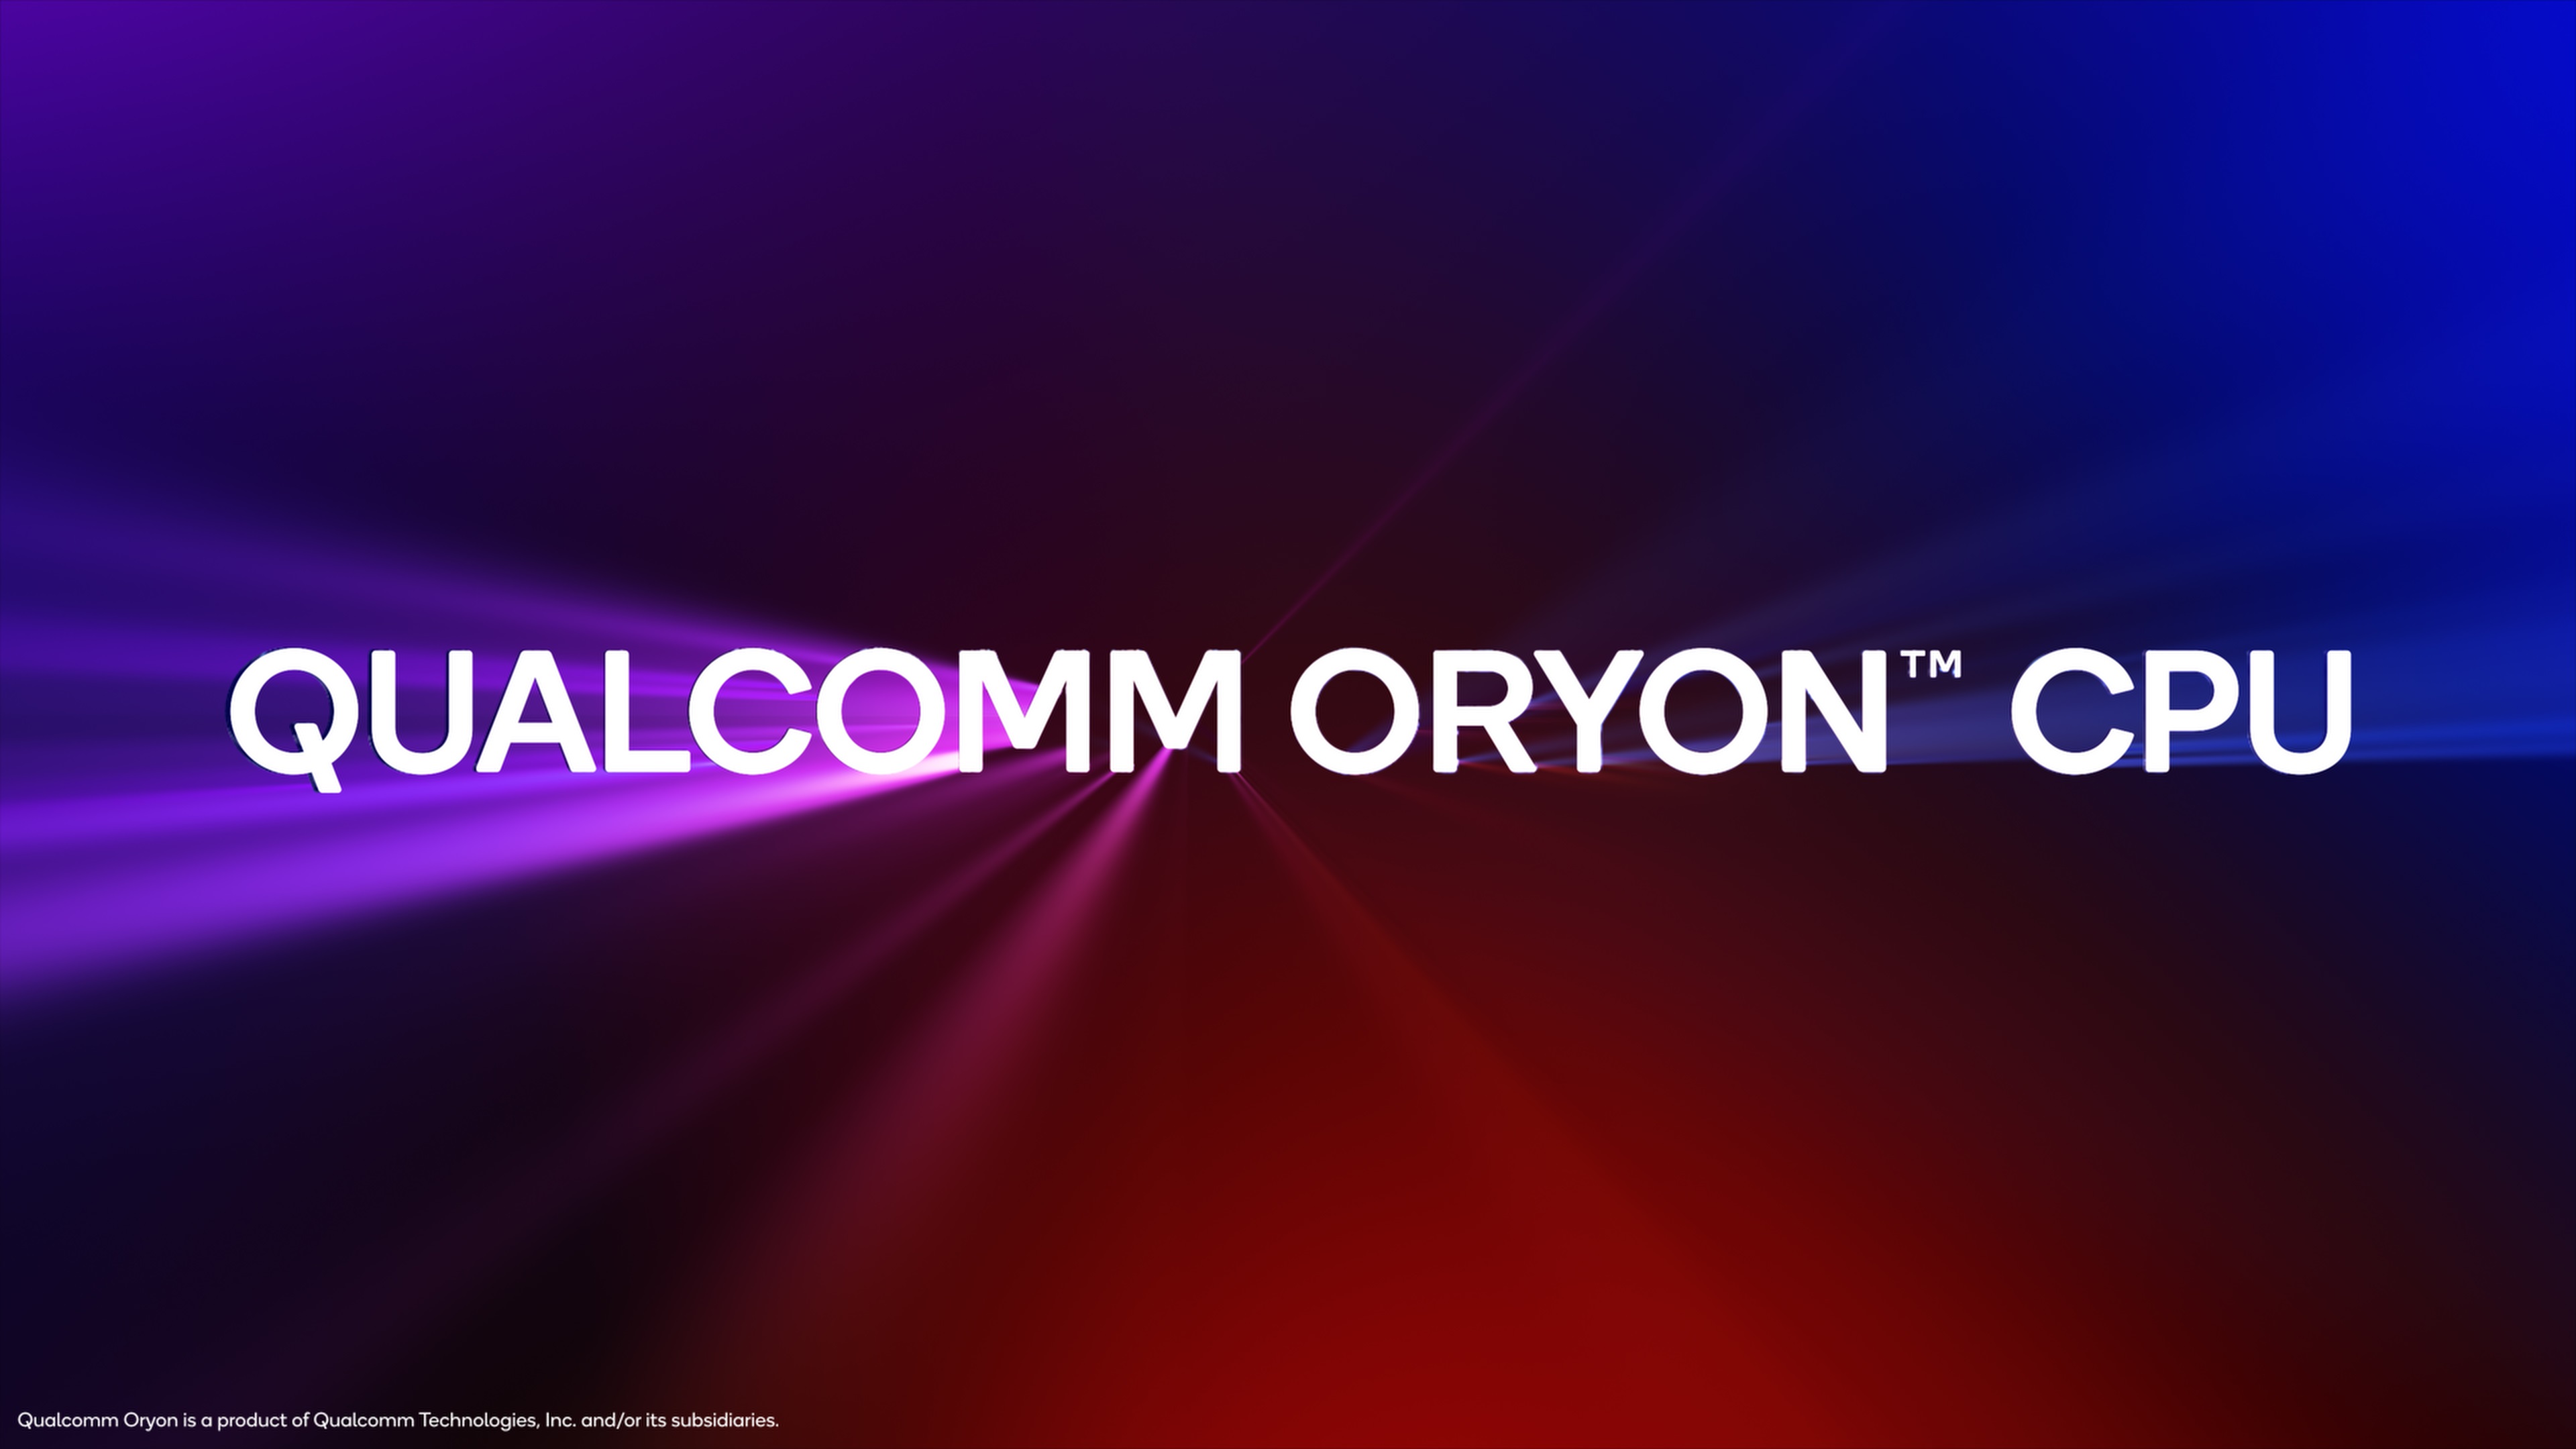 Announcement of Qualcomm Oryon